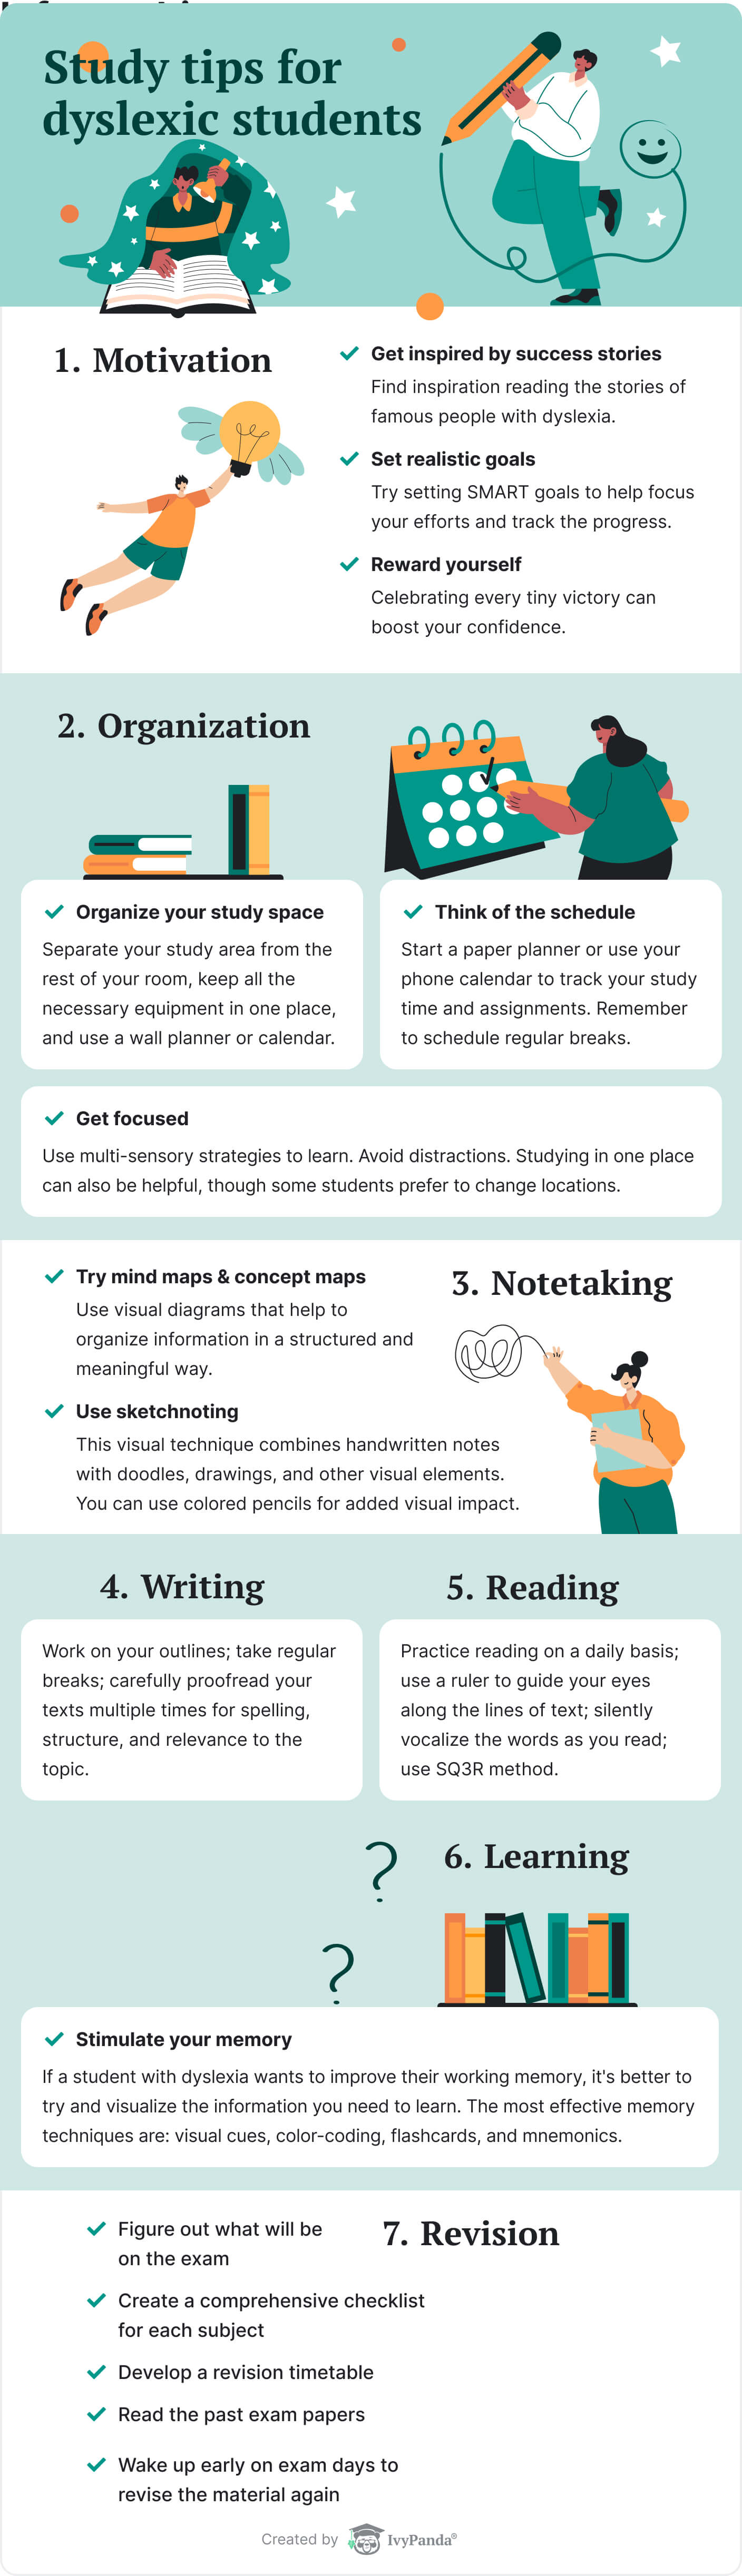 The picture lists useful study tips for students with dyslexia.